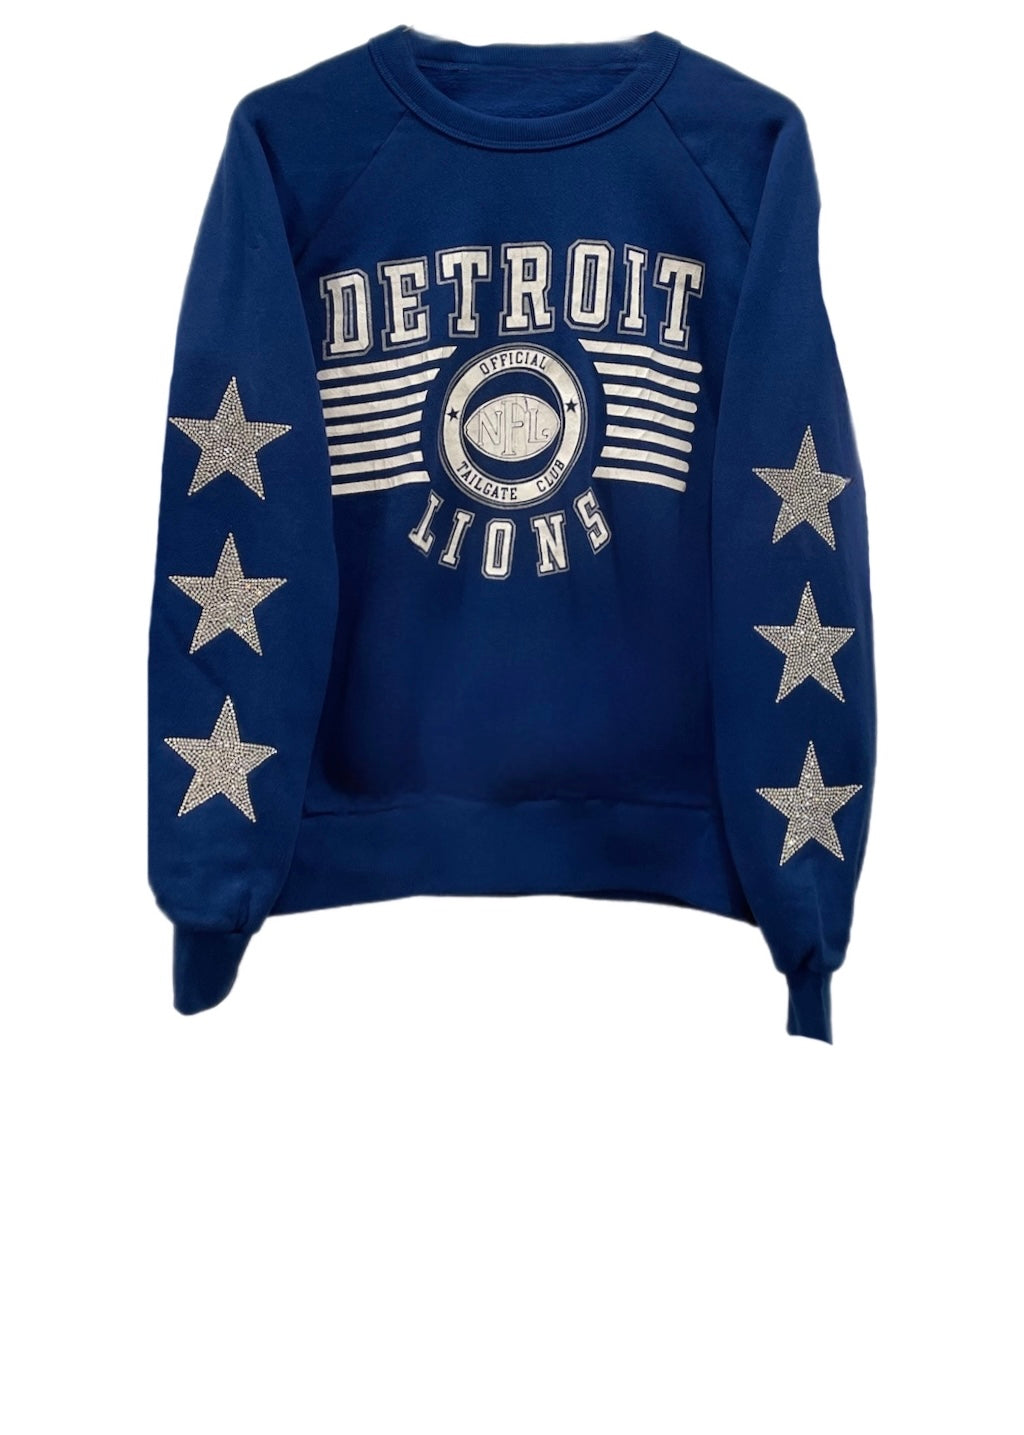 Detroit, Lions, NFL One of a KIND Vintage Sweatshirt with Three Crystal Star Design